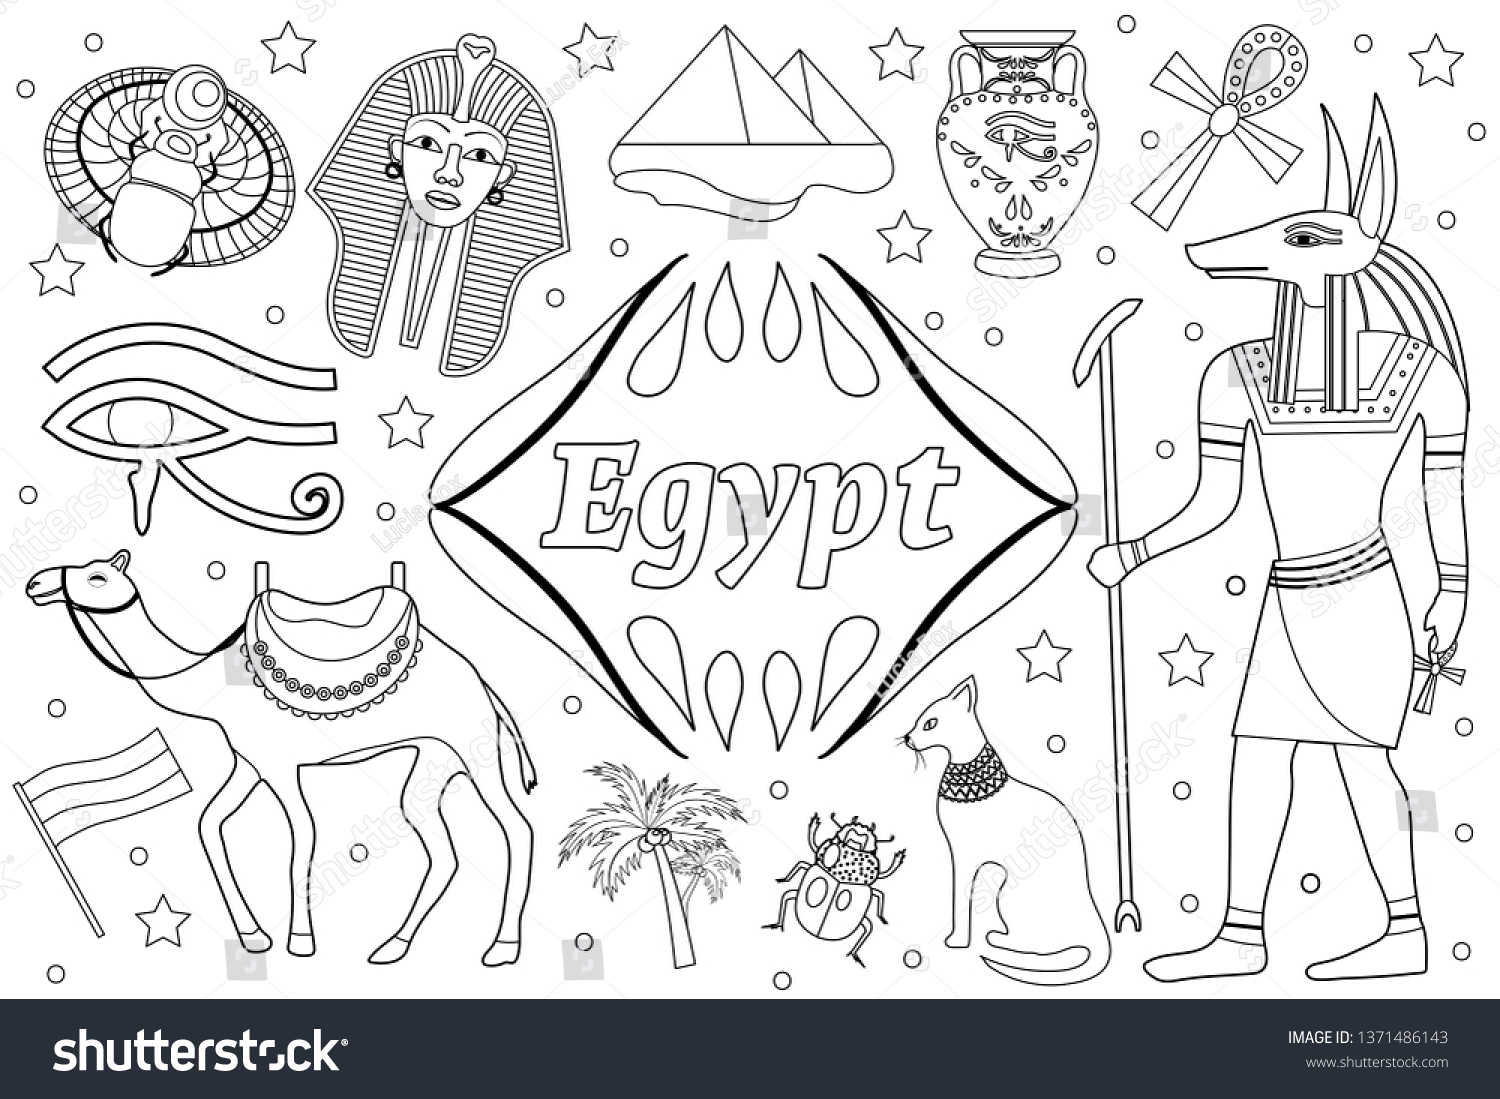 Ancient magic Egypt set objects objects. Coloring book page for kids. Collection design elements witch sorrow beetles, pharaoh, pyramid, ankh, anubis, camel, antique hieroglyp. Vector illustration. #1371486143